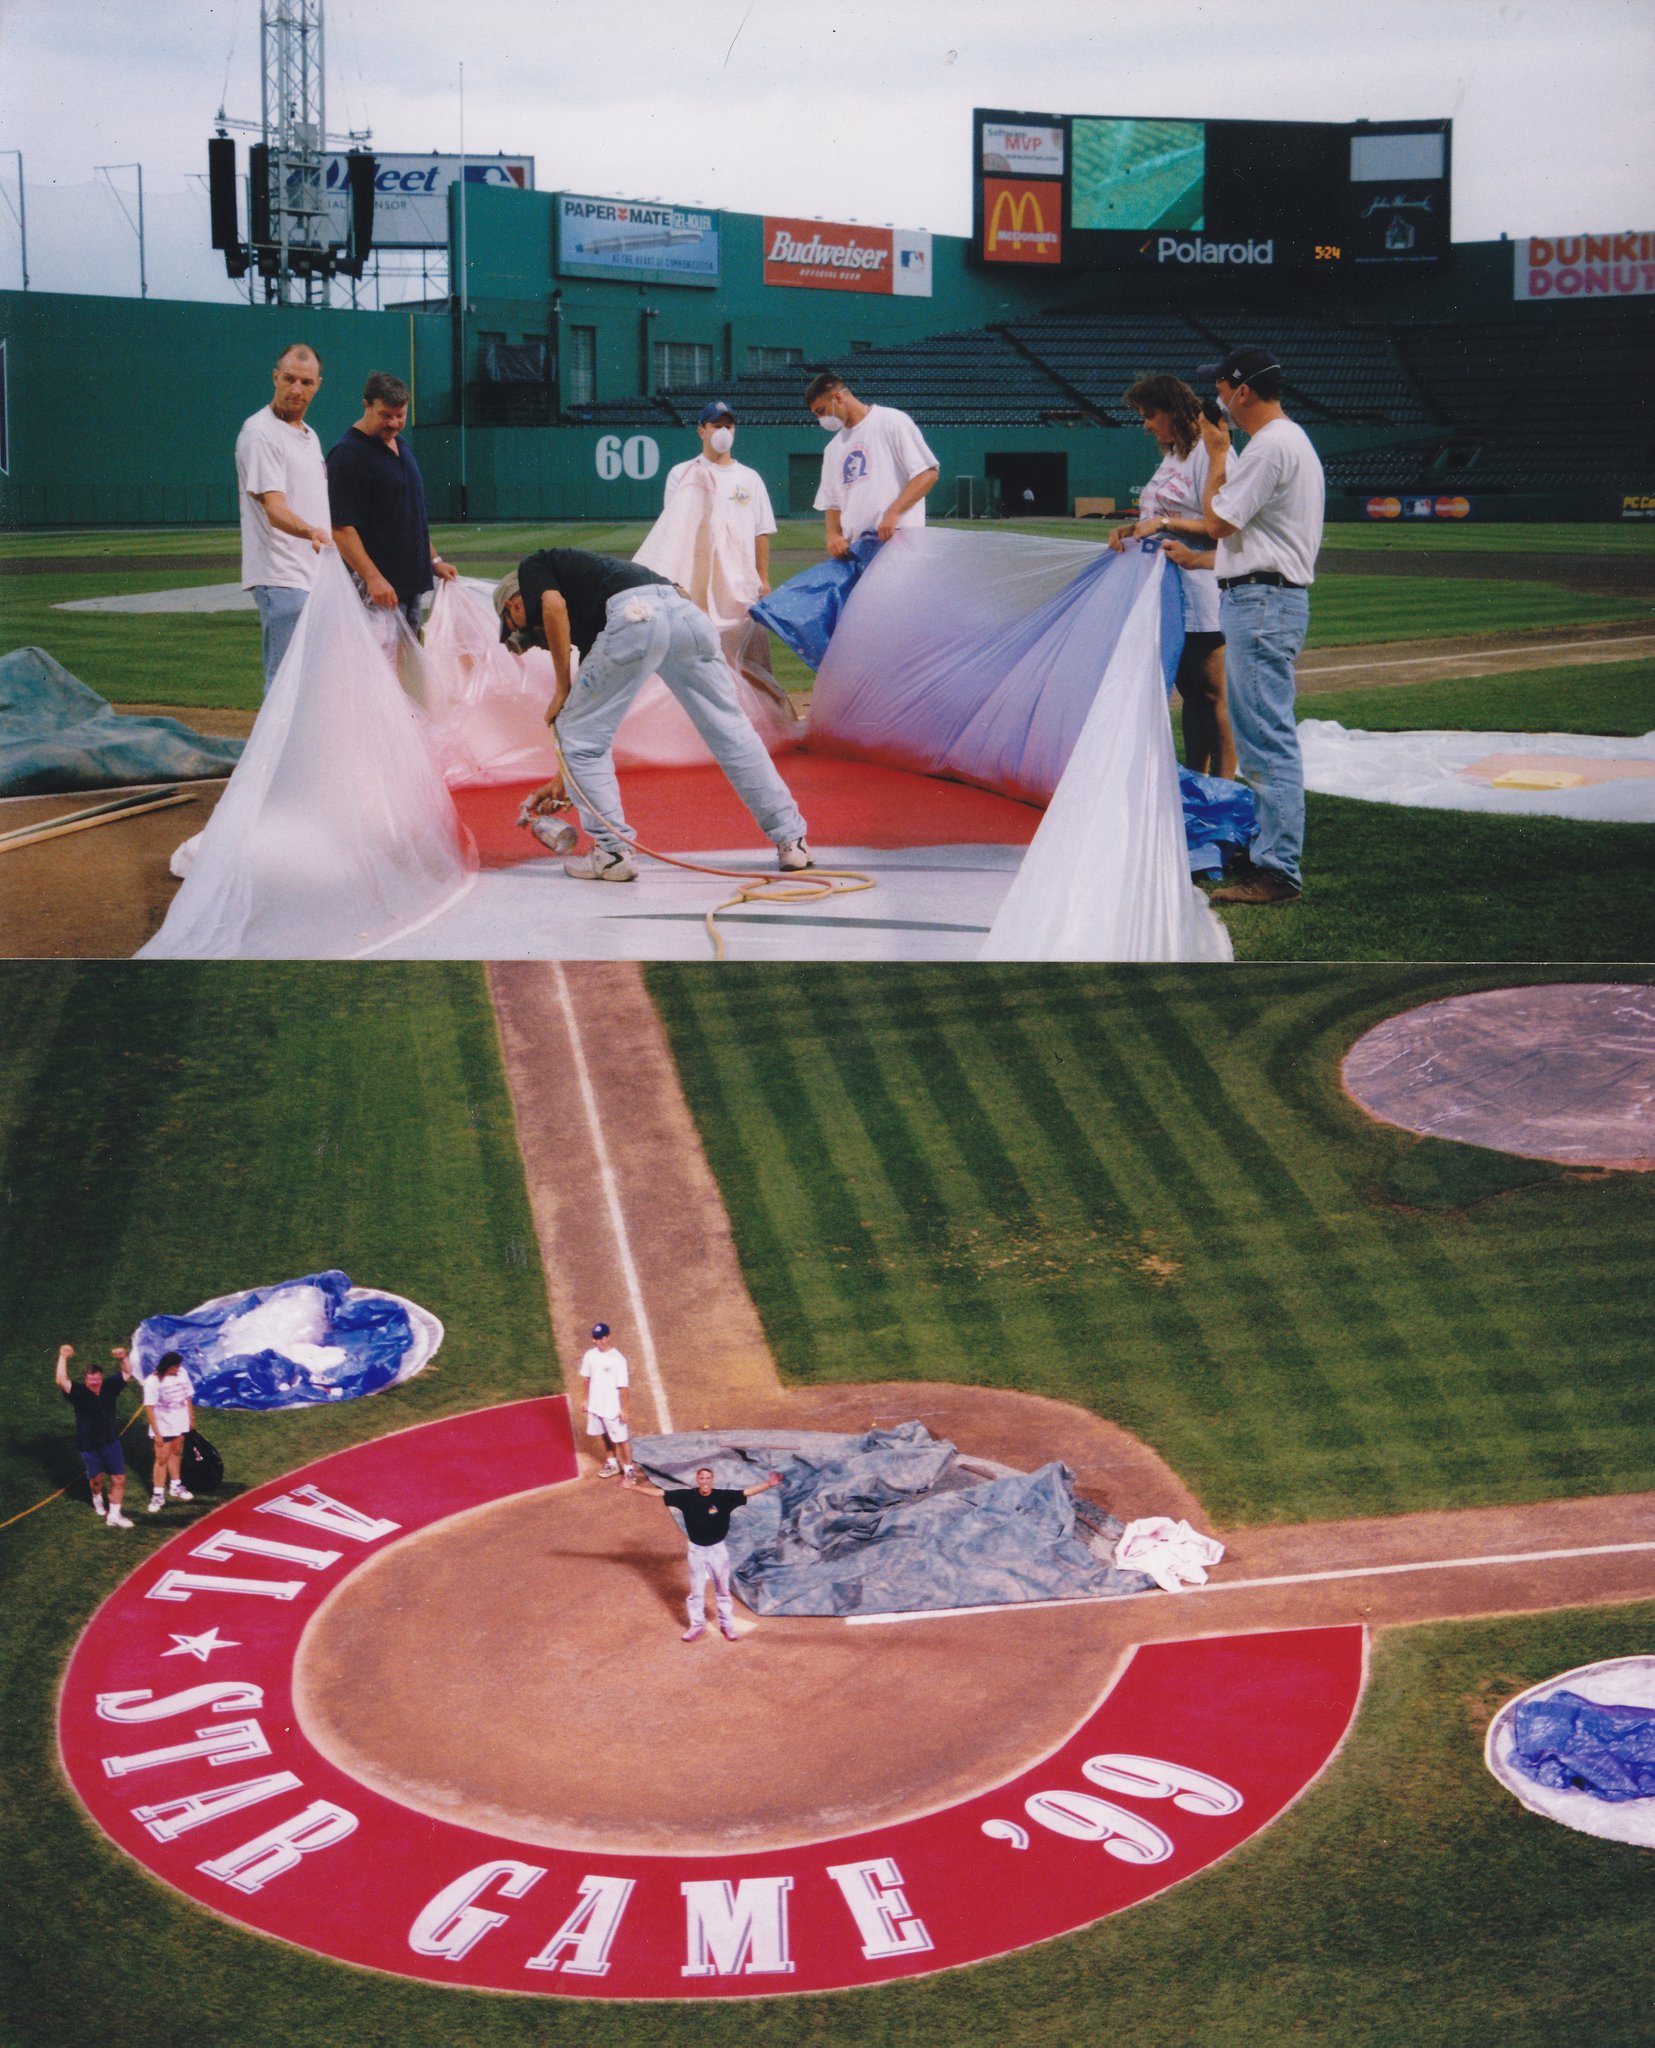 My dad painting around home plate of Fenway park for the 1999 All Star game.